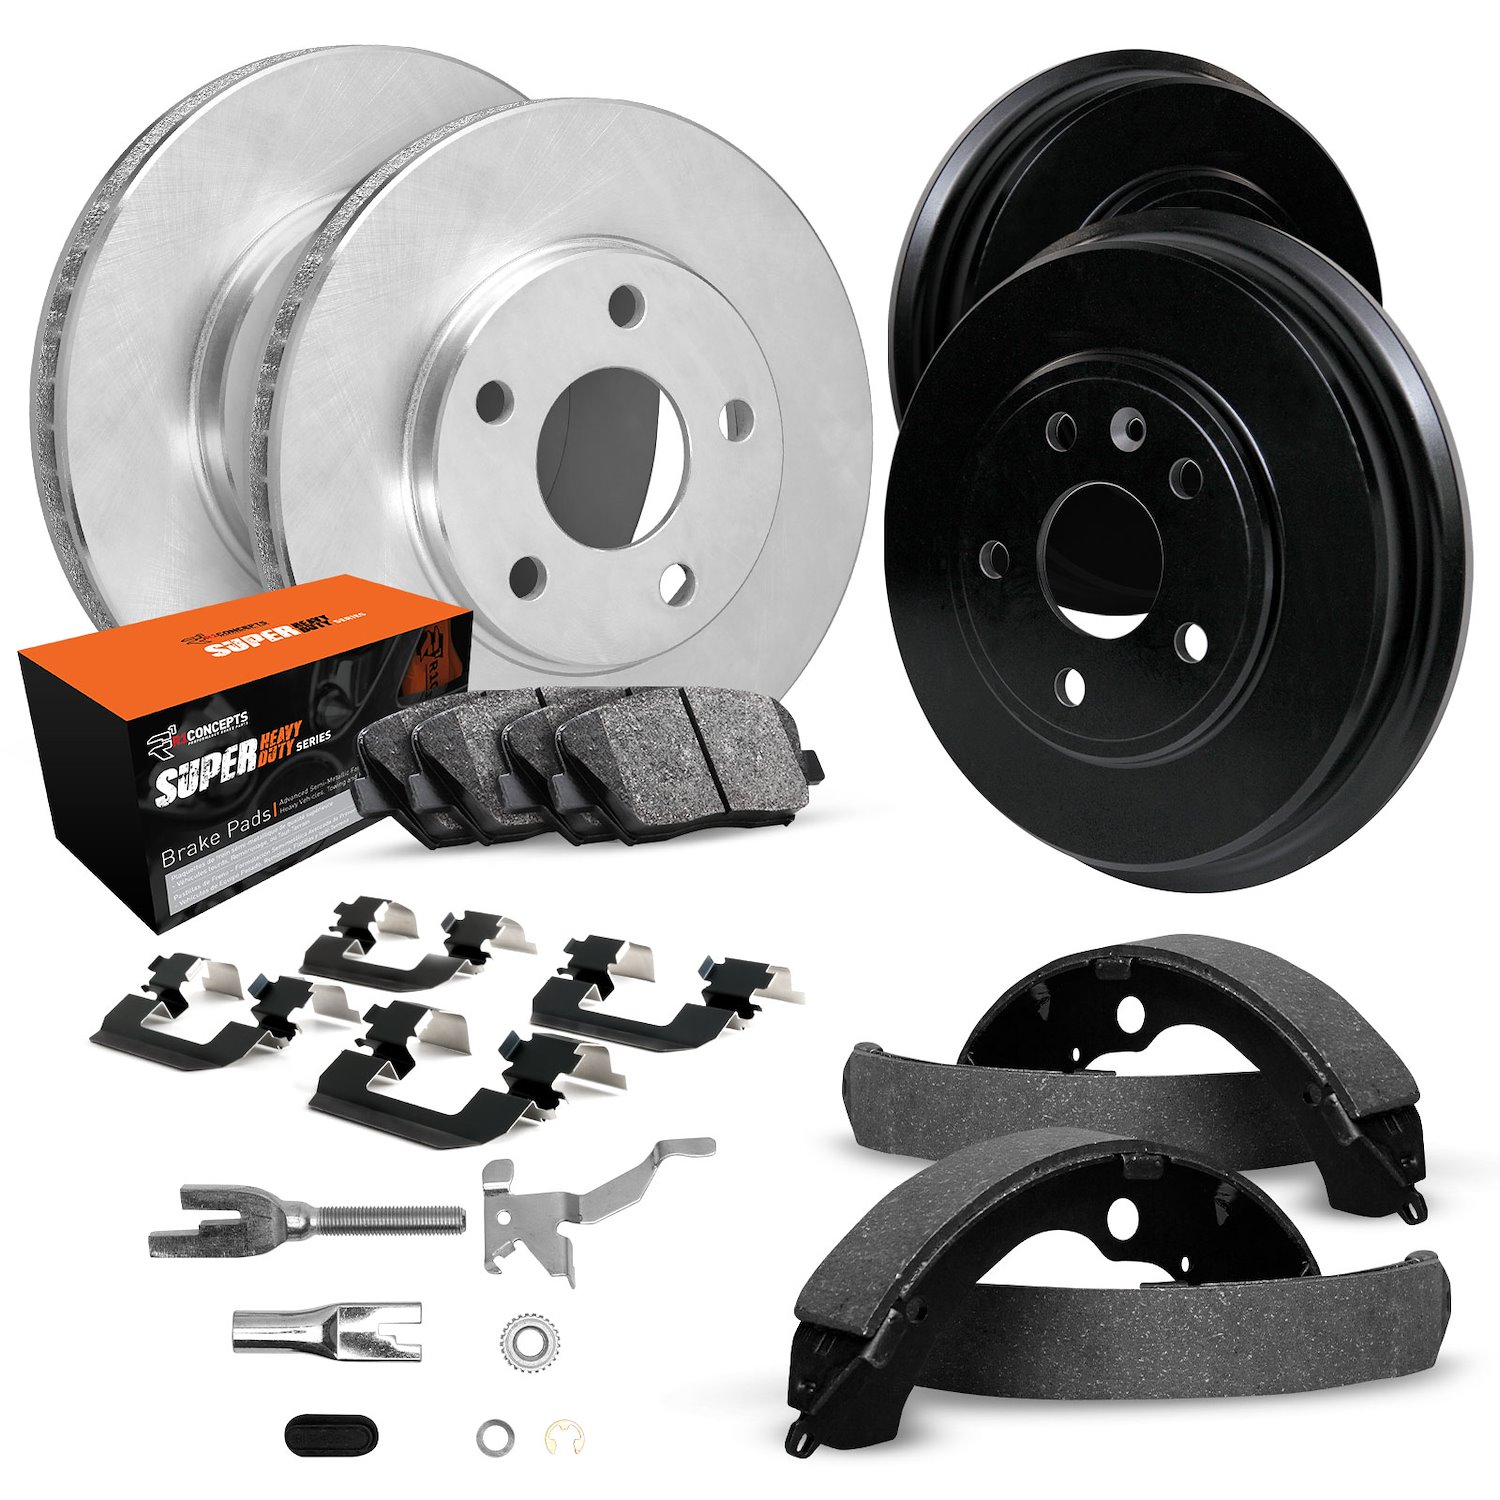 E-Line Blank Brake Rotor & Drum Set w/Super-Duty Pads, Shoes, Hardware, & Adjusters, 1998-2002 Ford/Lincoln/Mercury/Mazda